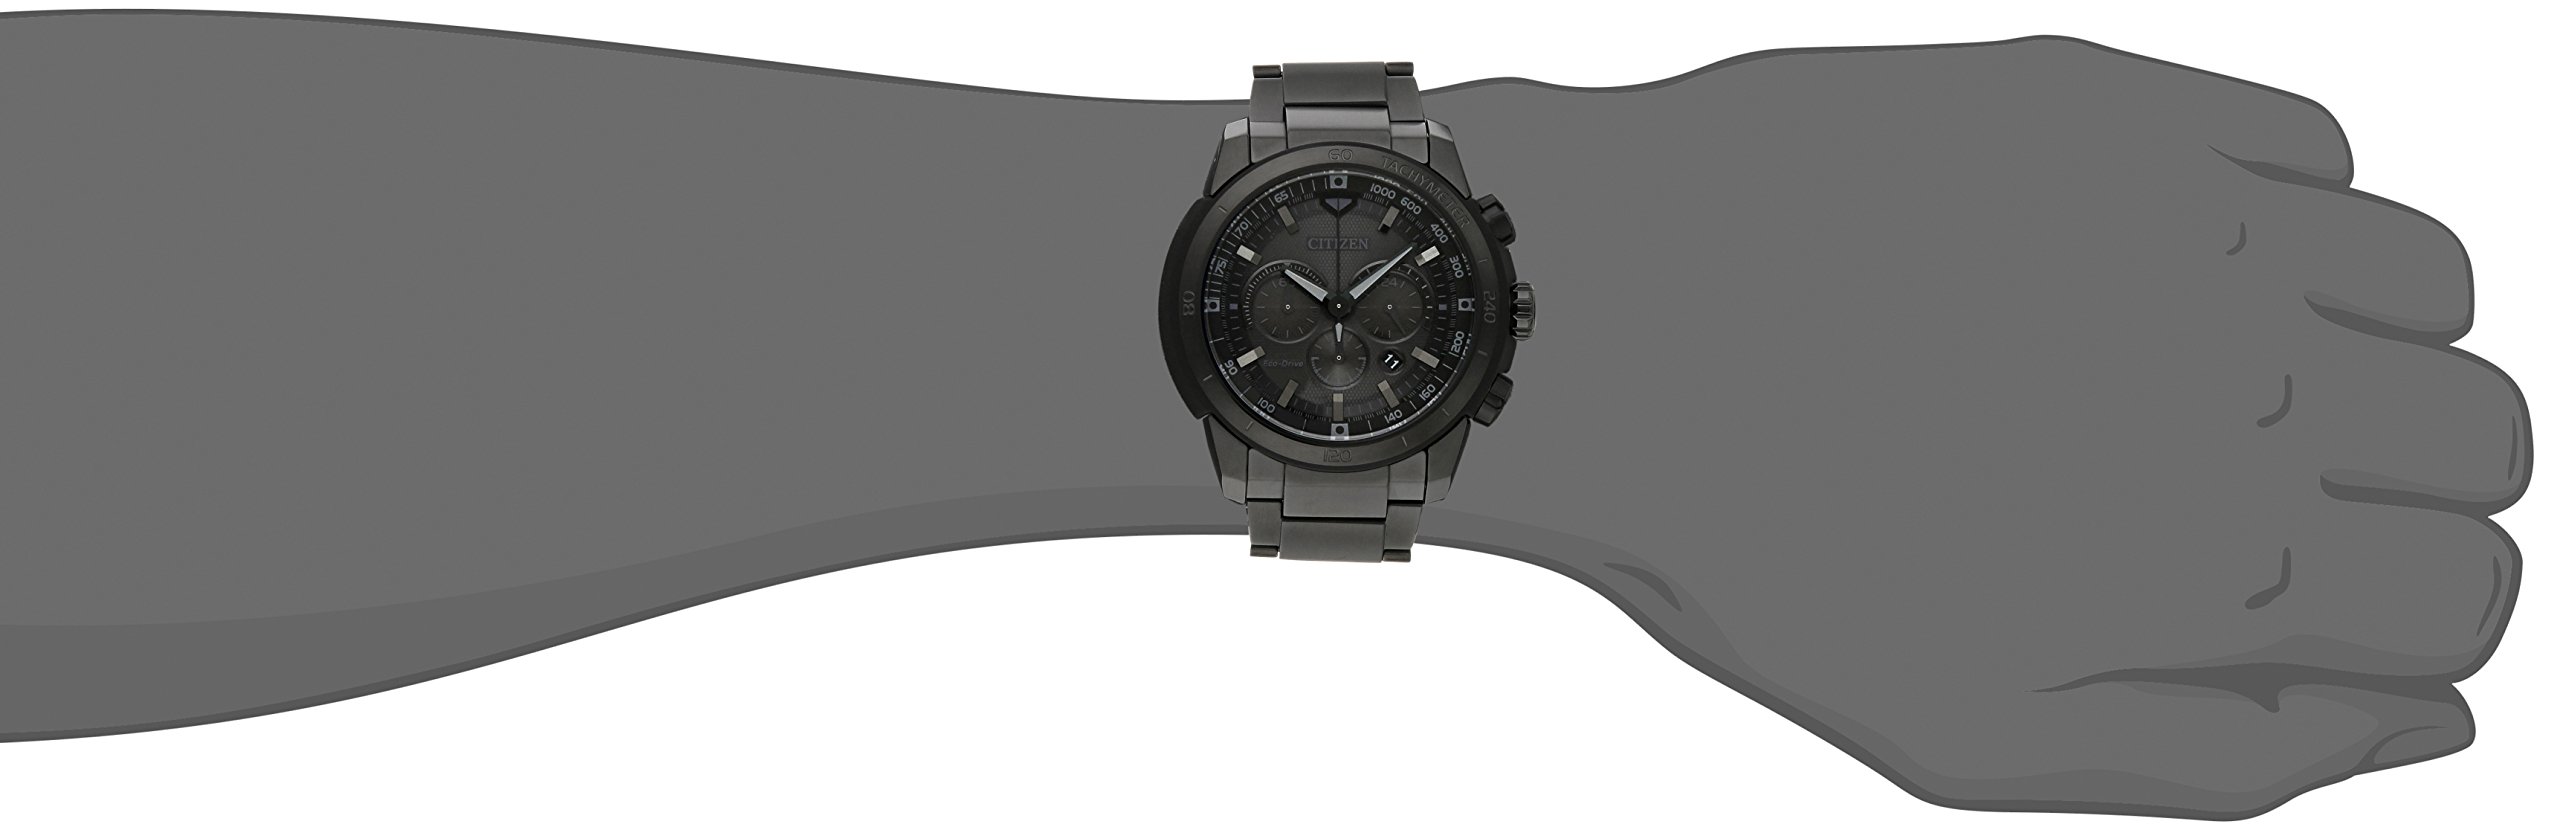 Citizen Men's Eco-Drive Weekender Ecosphere Chronograph Watch in IP Stainless Steel, Black Dial (Model: CA4184-81E)